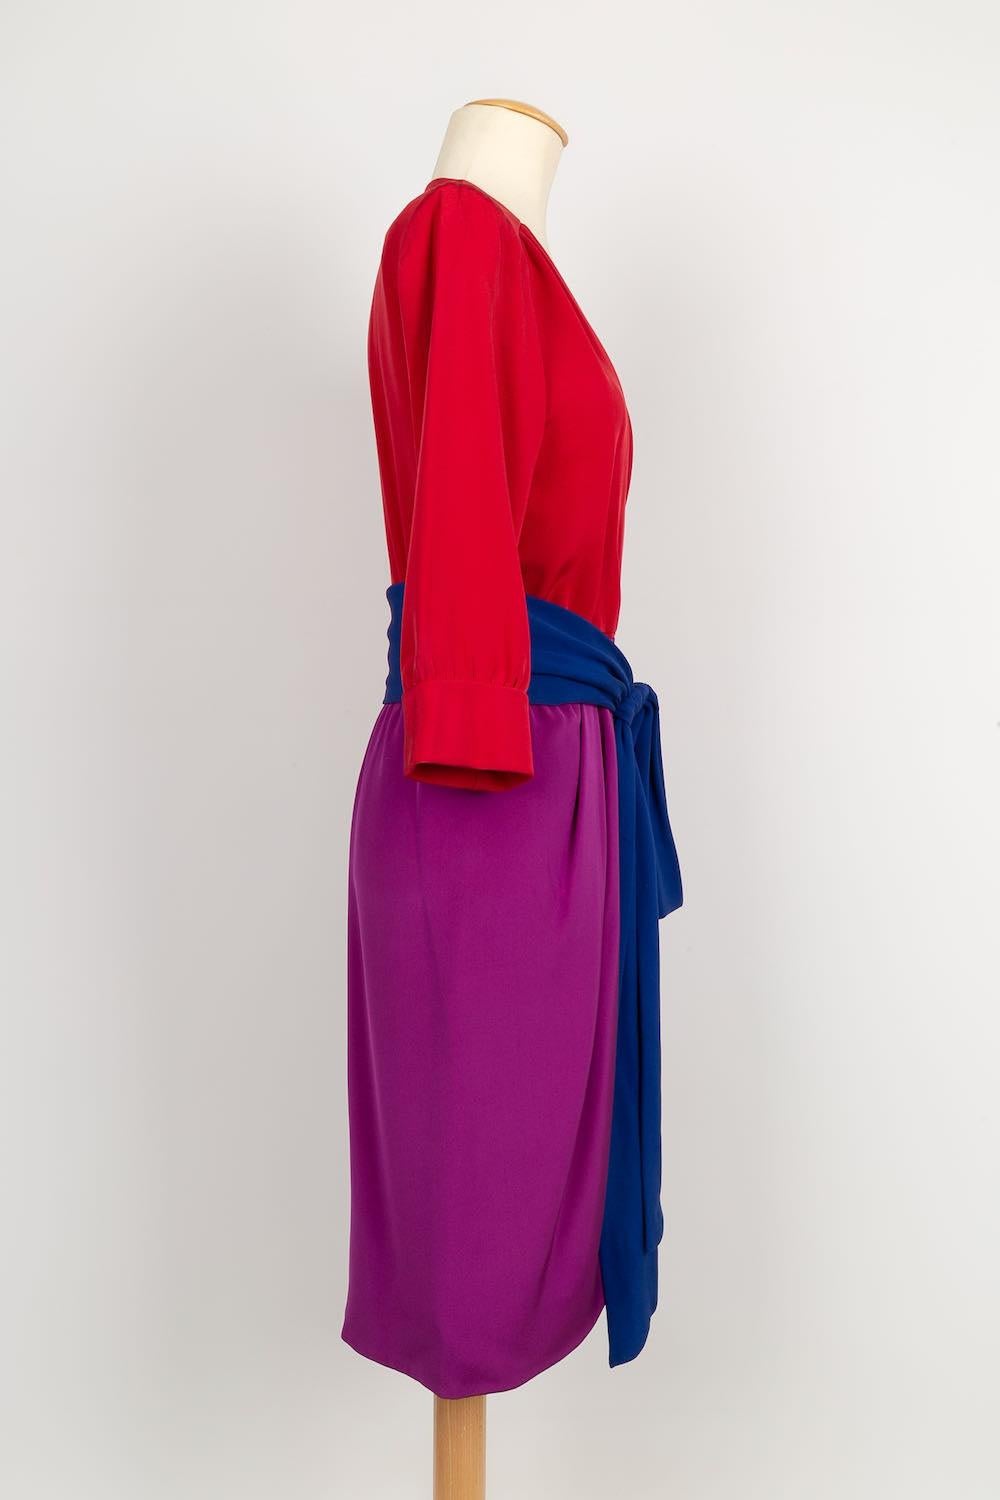 Women's Yves Saint Laurent Purple and Red Silk Haute Couture Dress with Blue Silk Belt